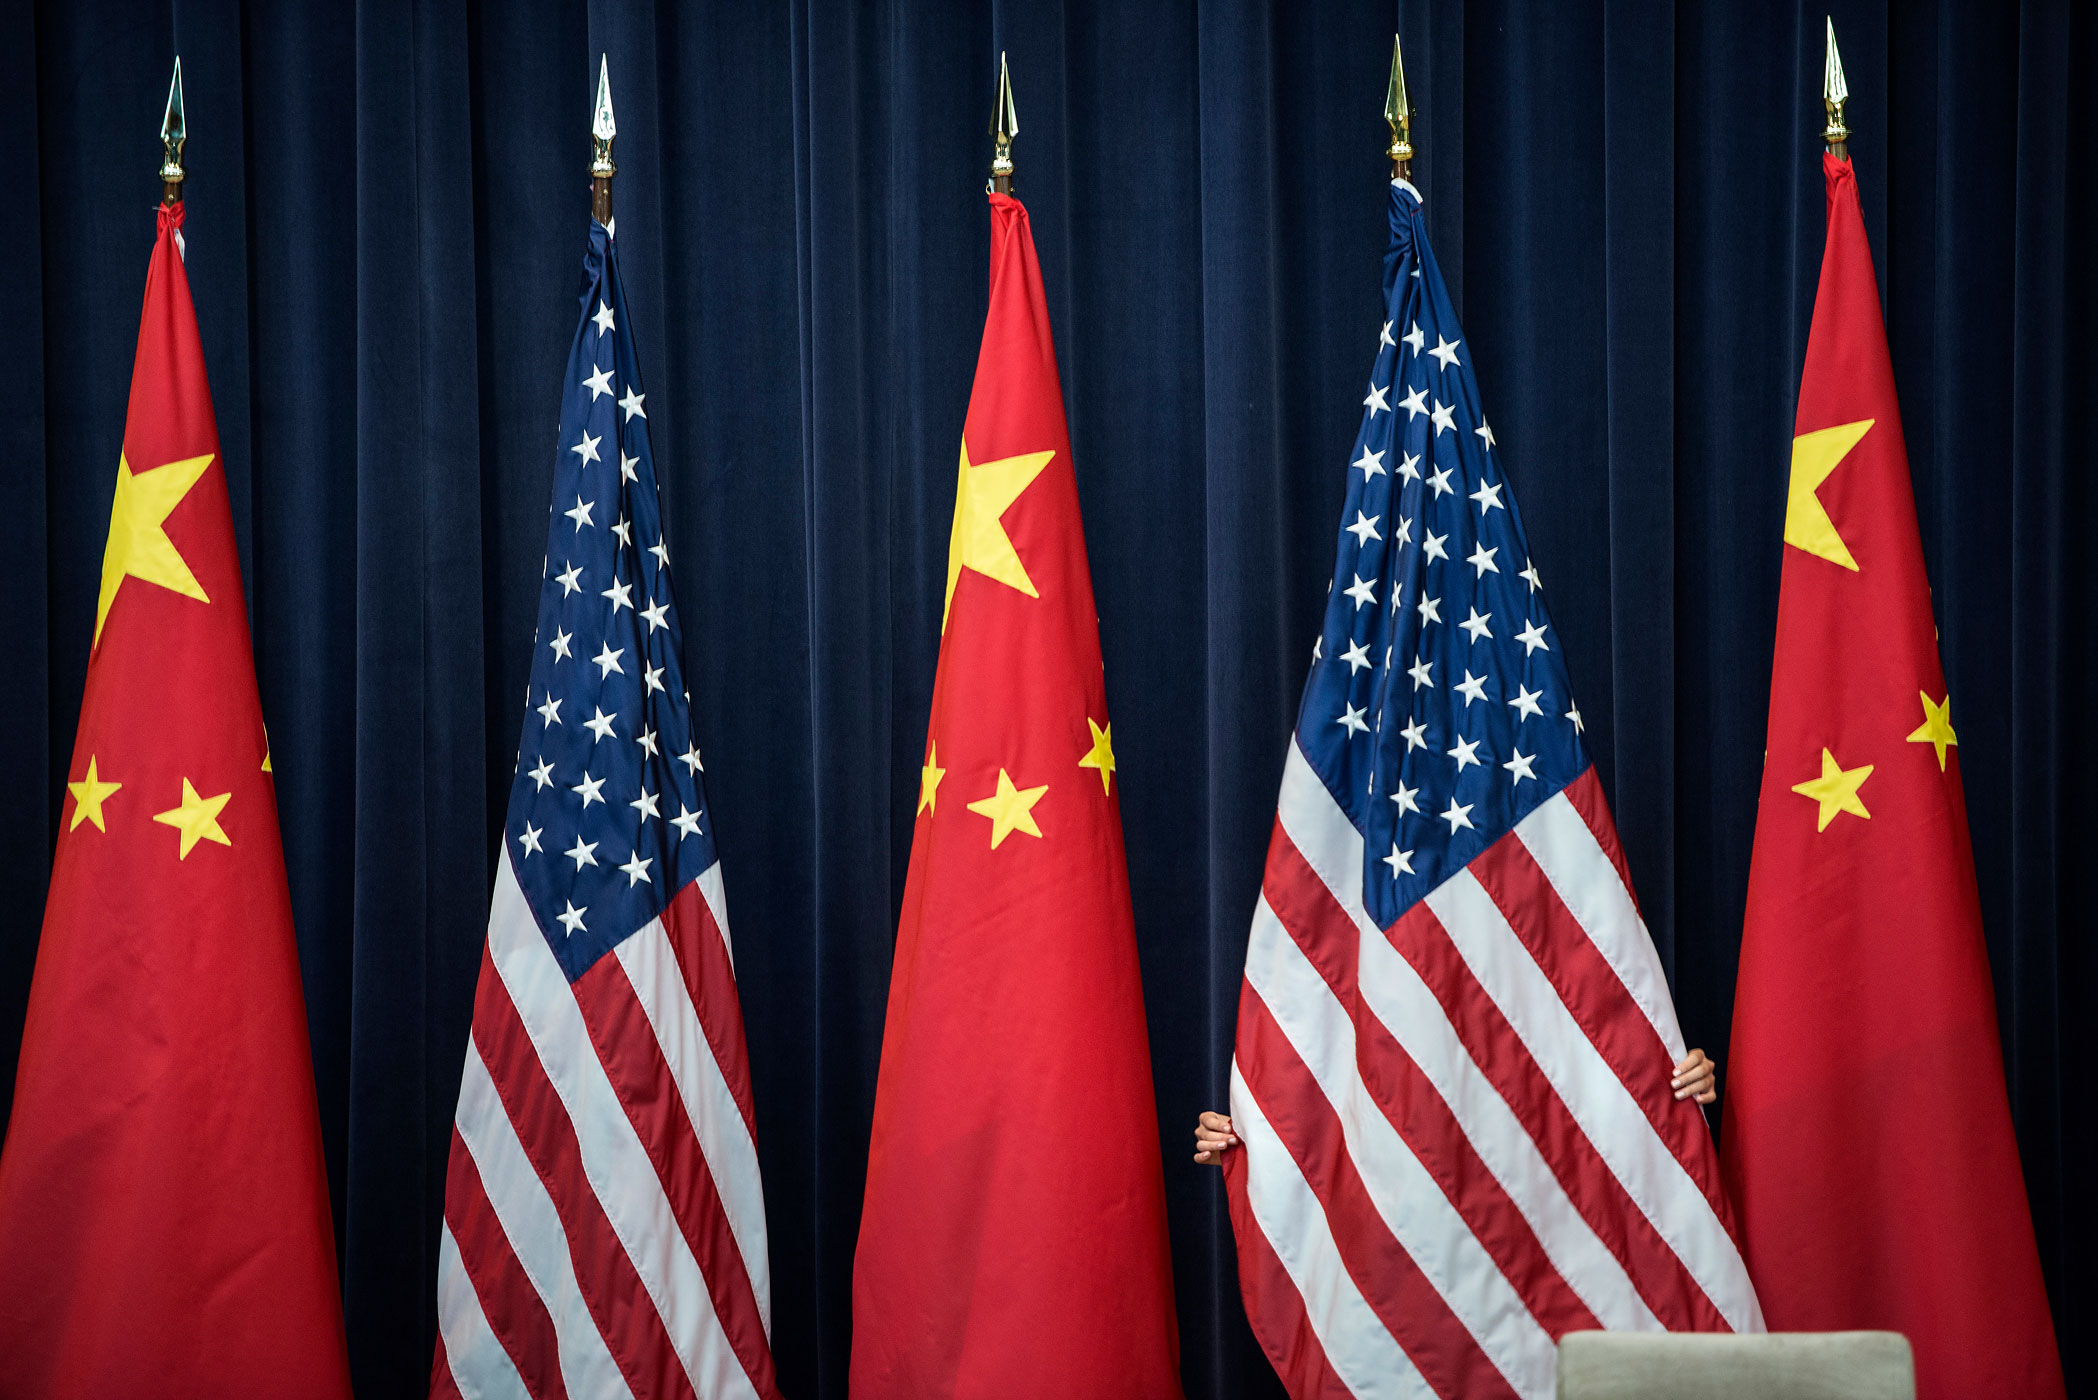 July 10, 2013. A staff member adjusts an American flag before the opening session of the U.S. and China Strategic and Economic Dialogue at the U.S. Department of State in Washington.